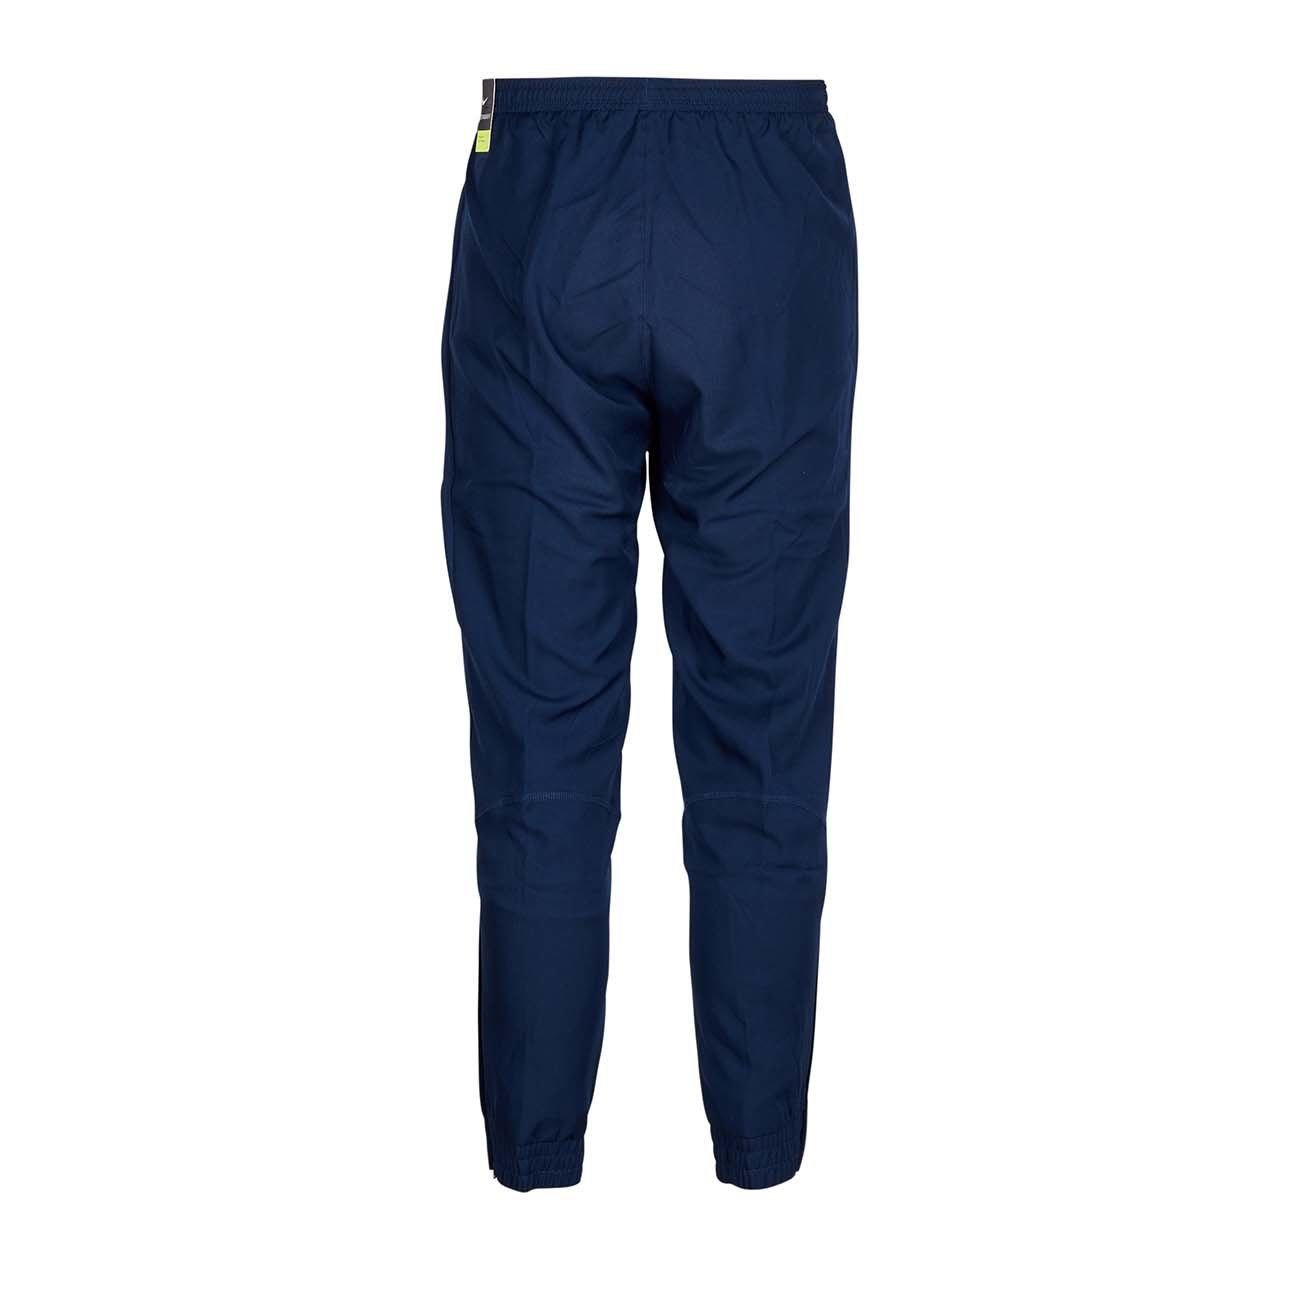 STAR THE VISION Solid Men Blue Track Pants - Buy STAR THE VISION Solid Men Blue  Track Pants Online at Best Prices in India | Flipkart.com